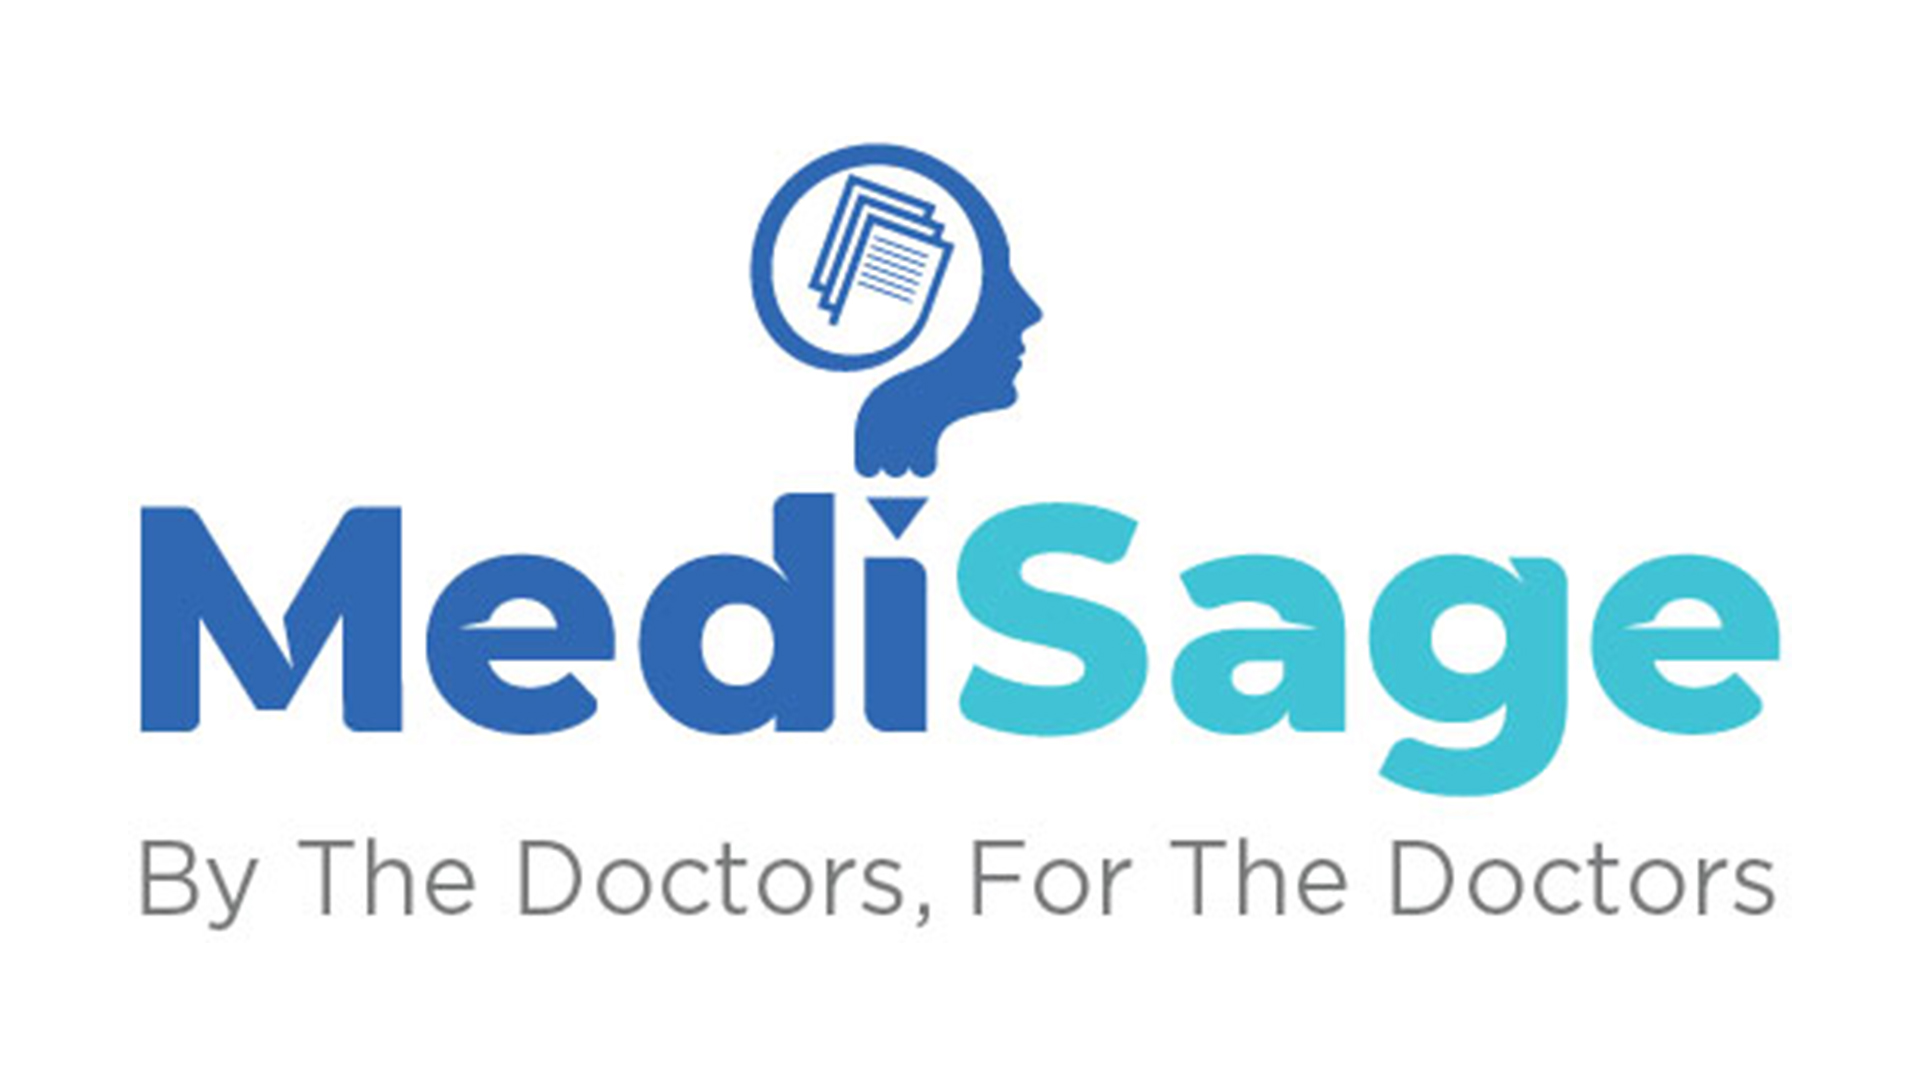 medisage aims to empower 5 lac+ doctors through its knowledge platform by 2022 - healthcare radius